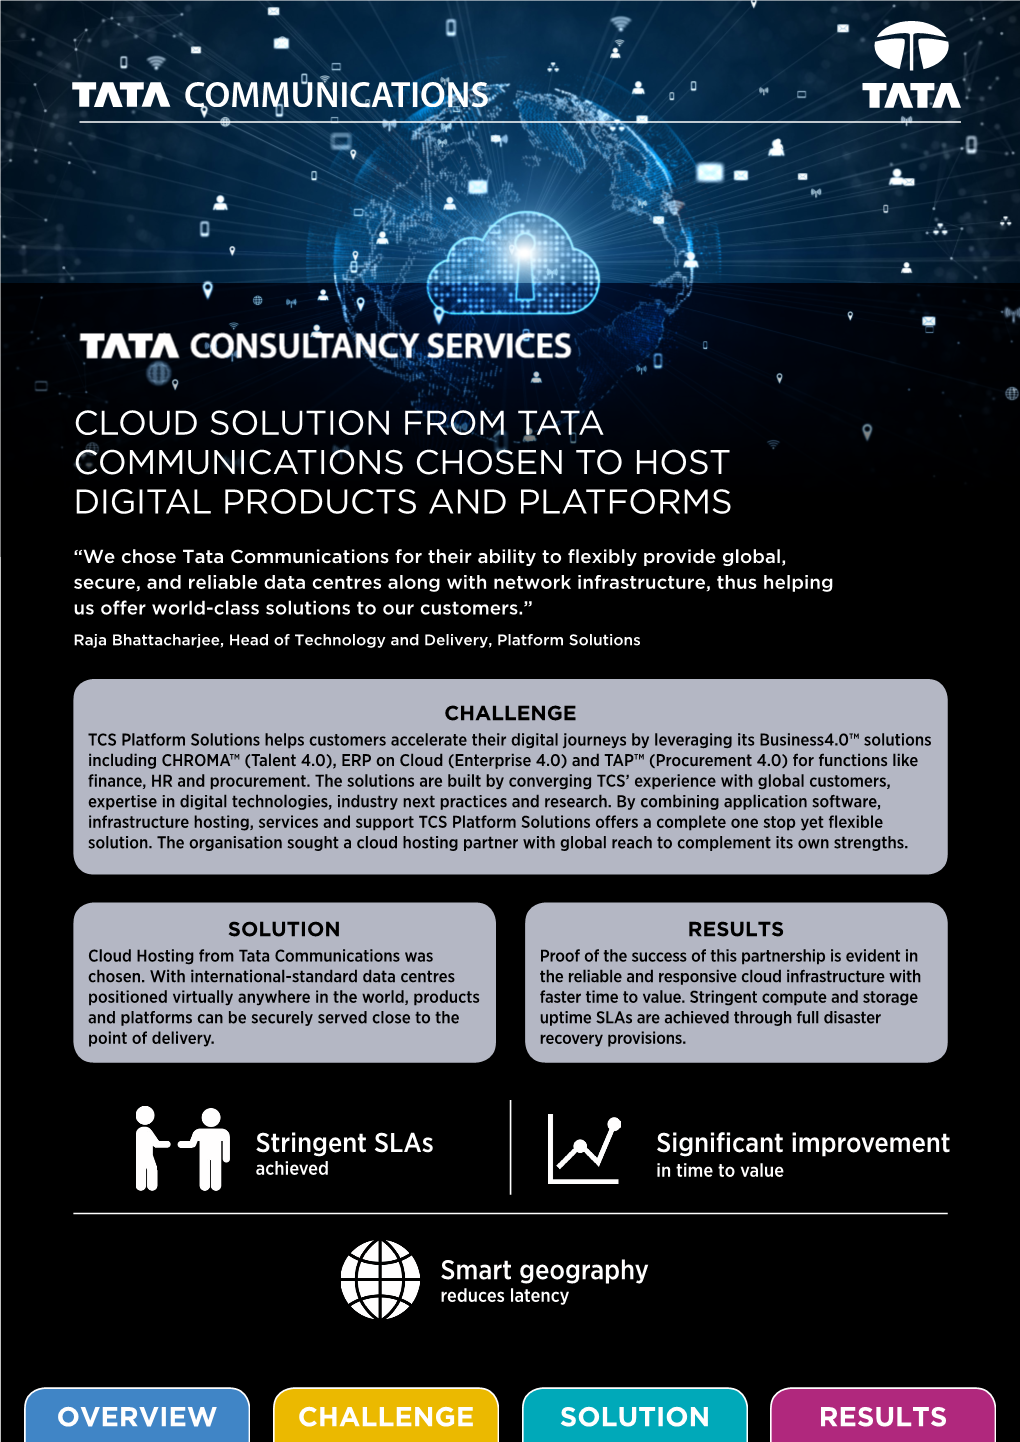 Cloud Solution from Tata Communications Chosen to Host Digital Products and Platforms